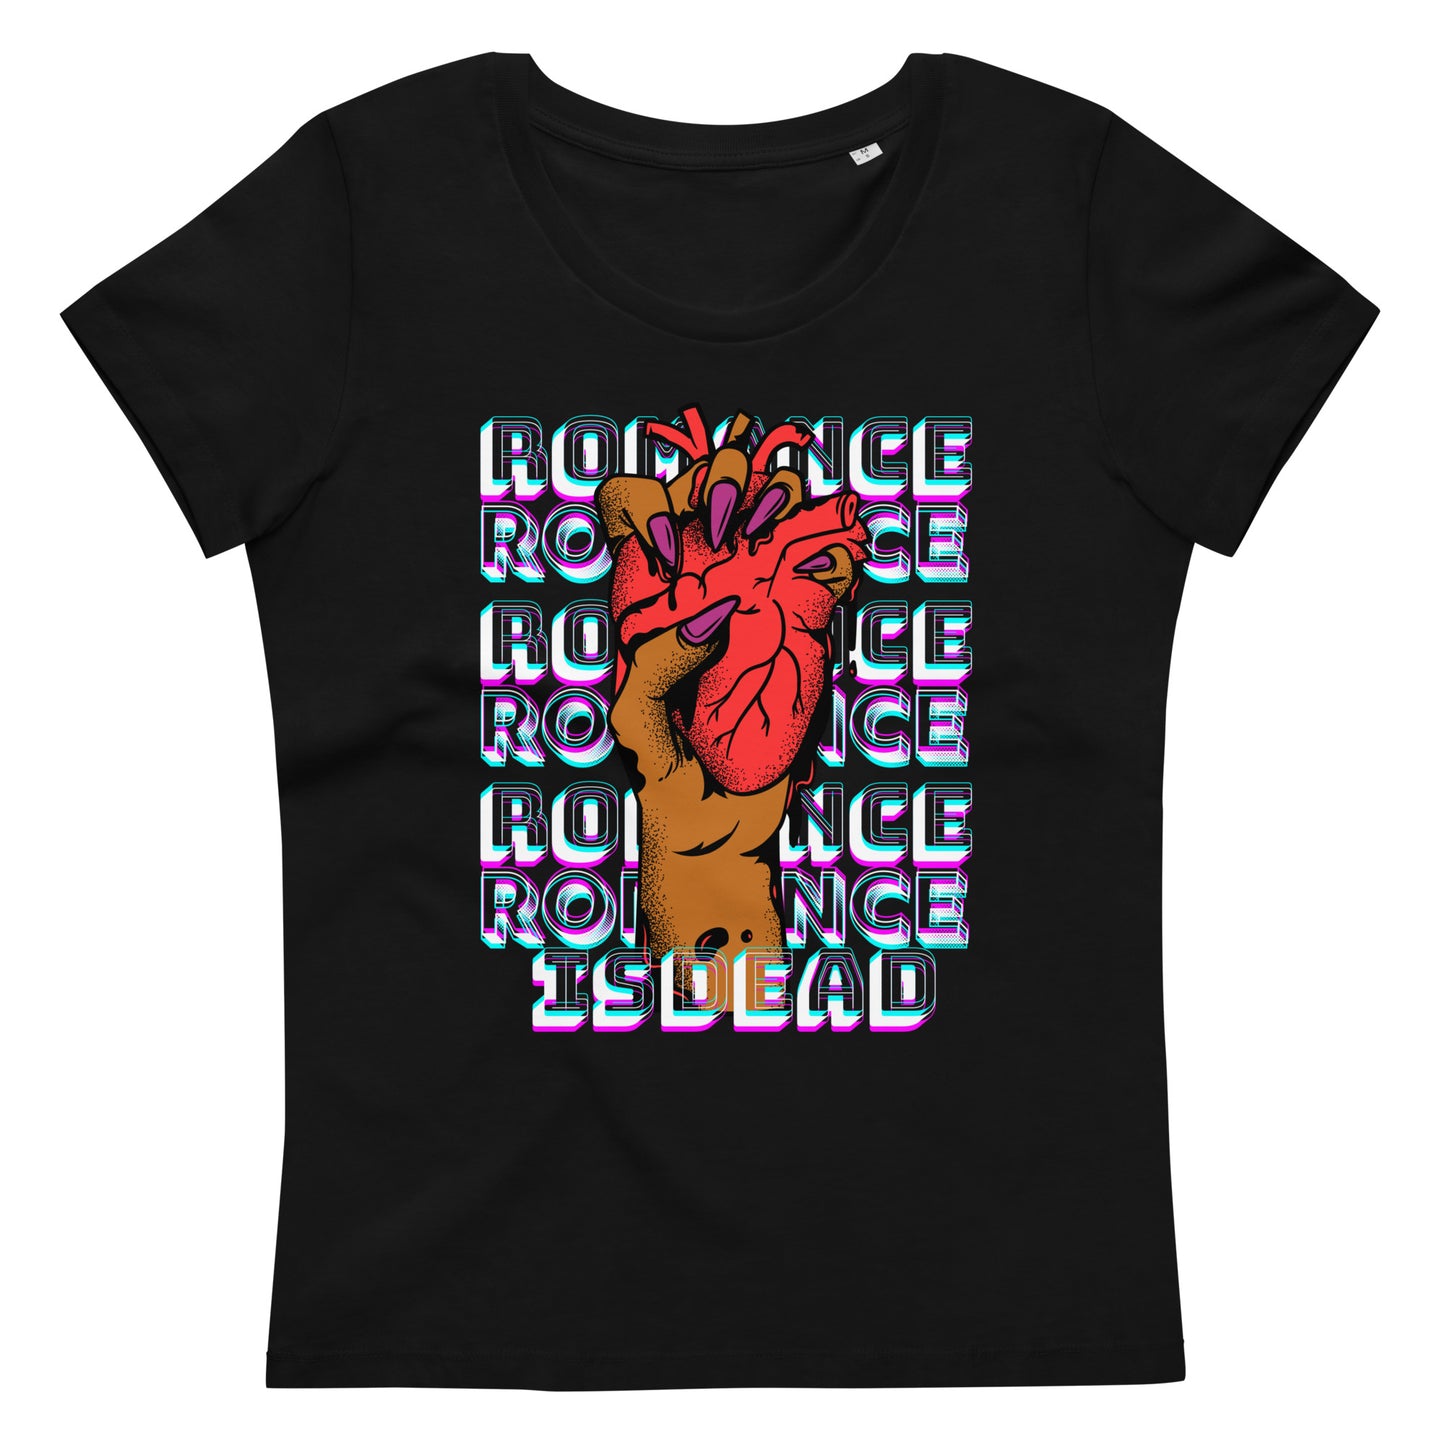 WOMEN'S FITTED R.I.D. DIGITAL GRAPHIC T-SHIRT